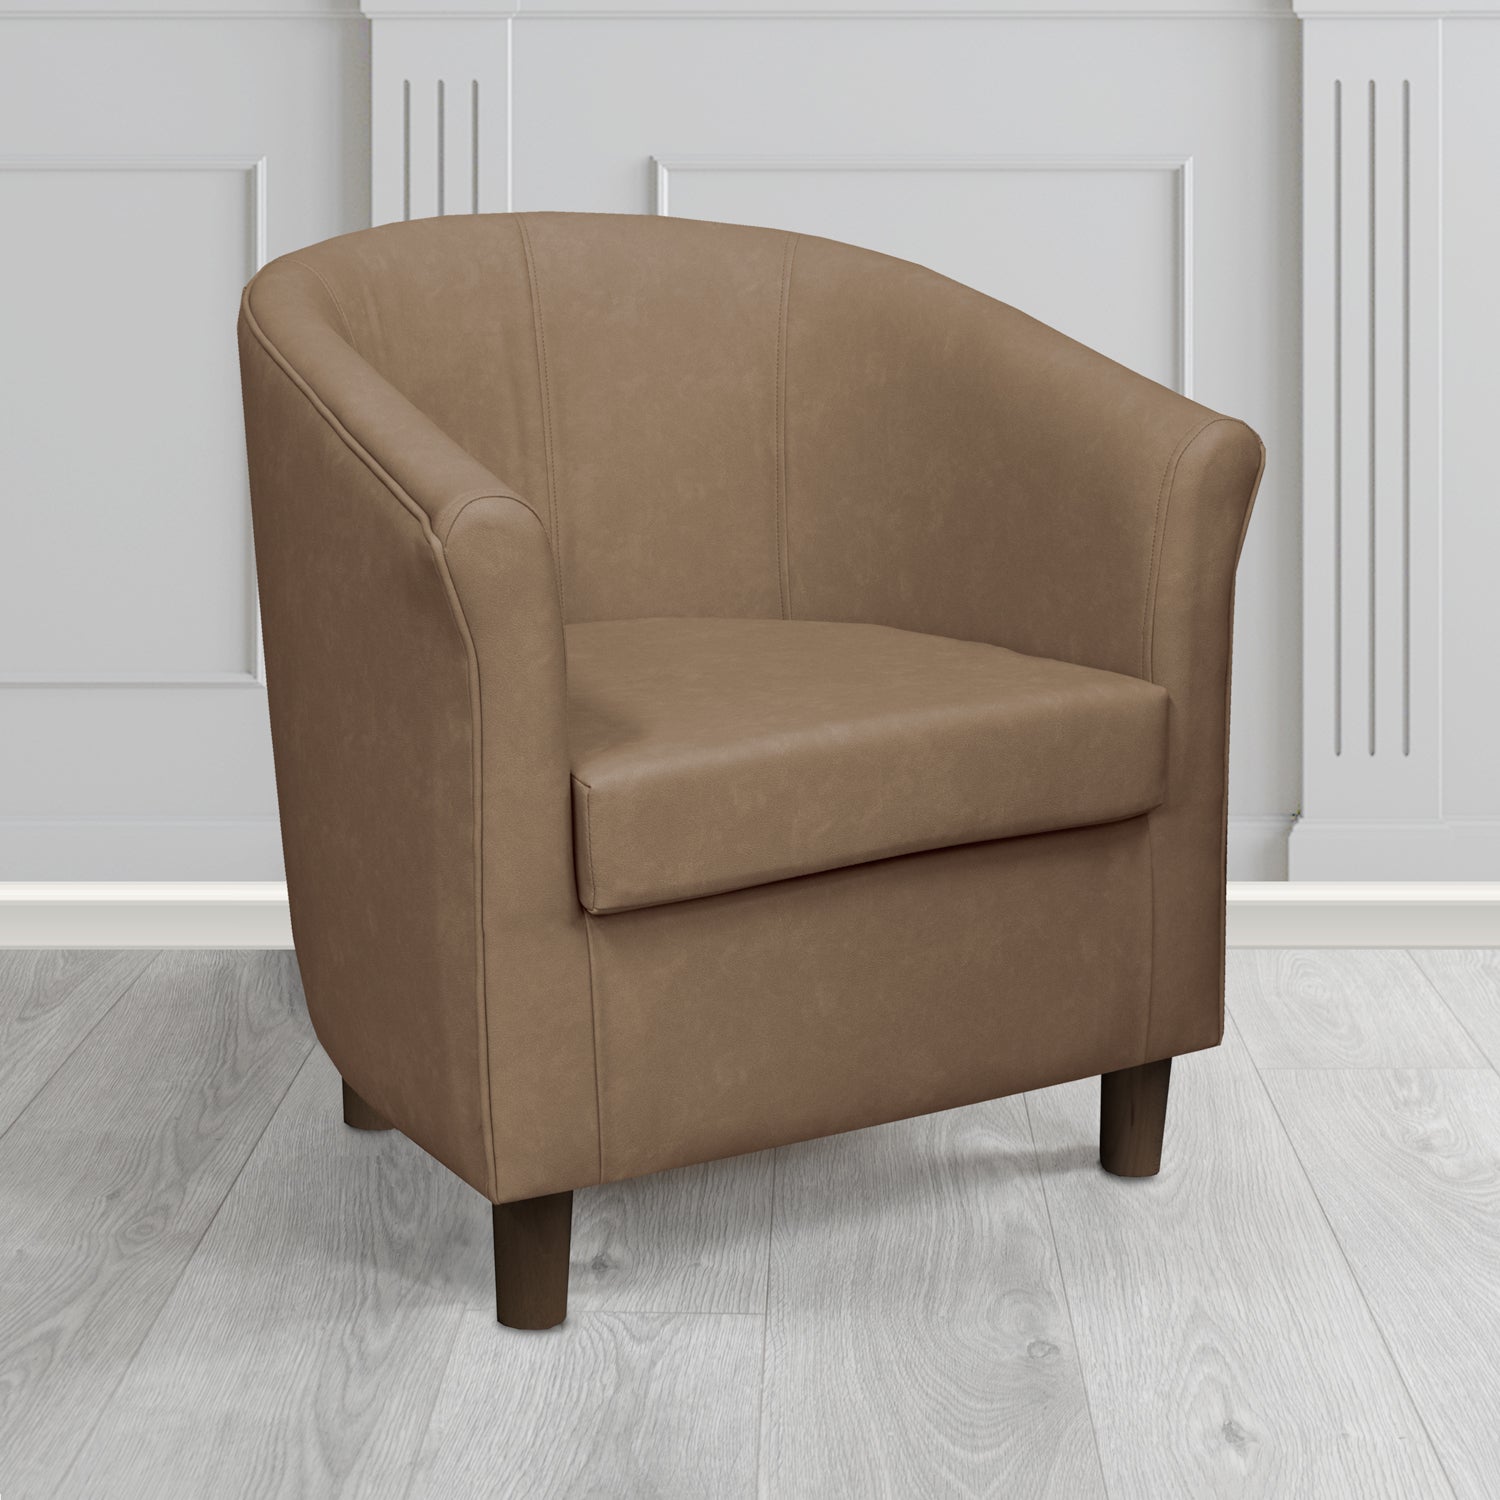 Tuscany Tub Chair in Infiniti Truffle INF1848 Antimicrobial Crib 5 Faux Leather - The Tub Chair Shop